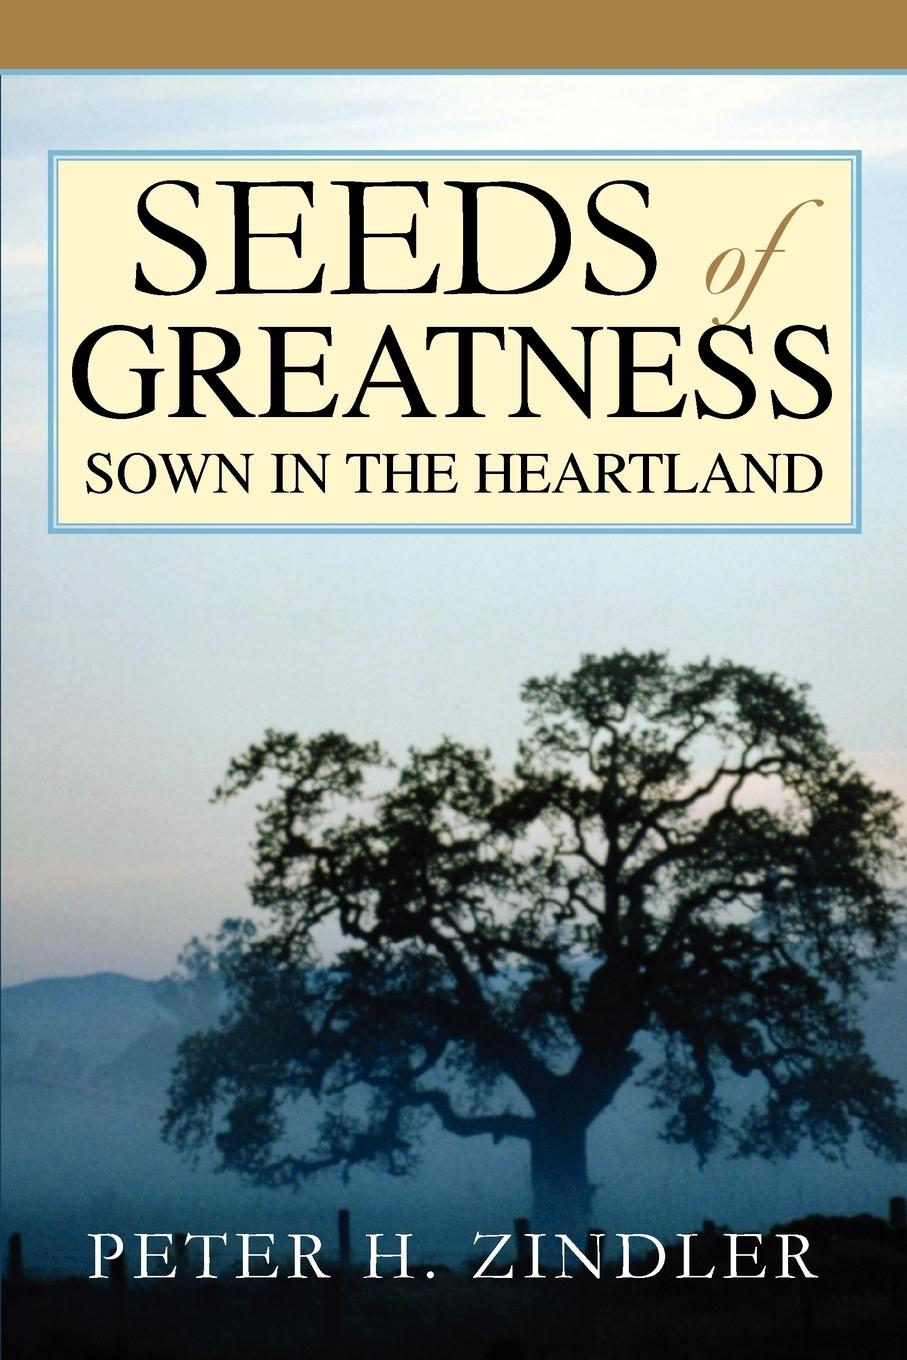 Seeds of Greatness Sown in the Heartland - Zindler, Peter H.